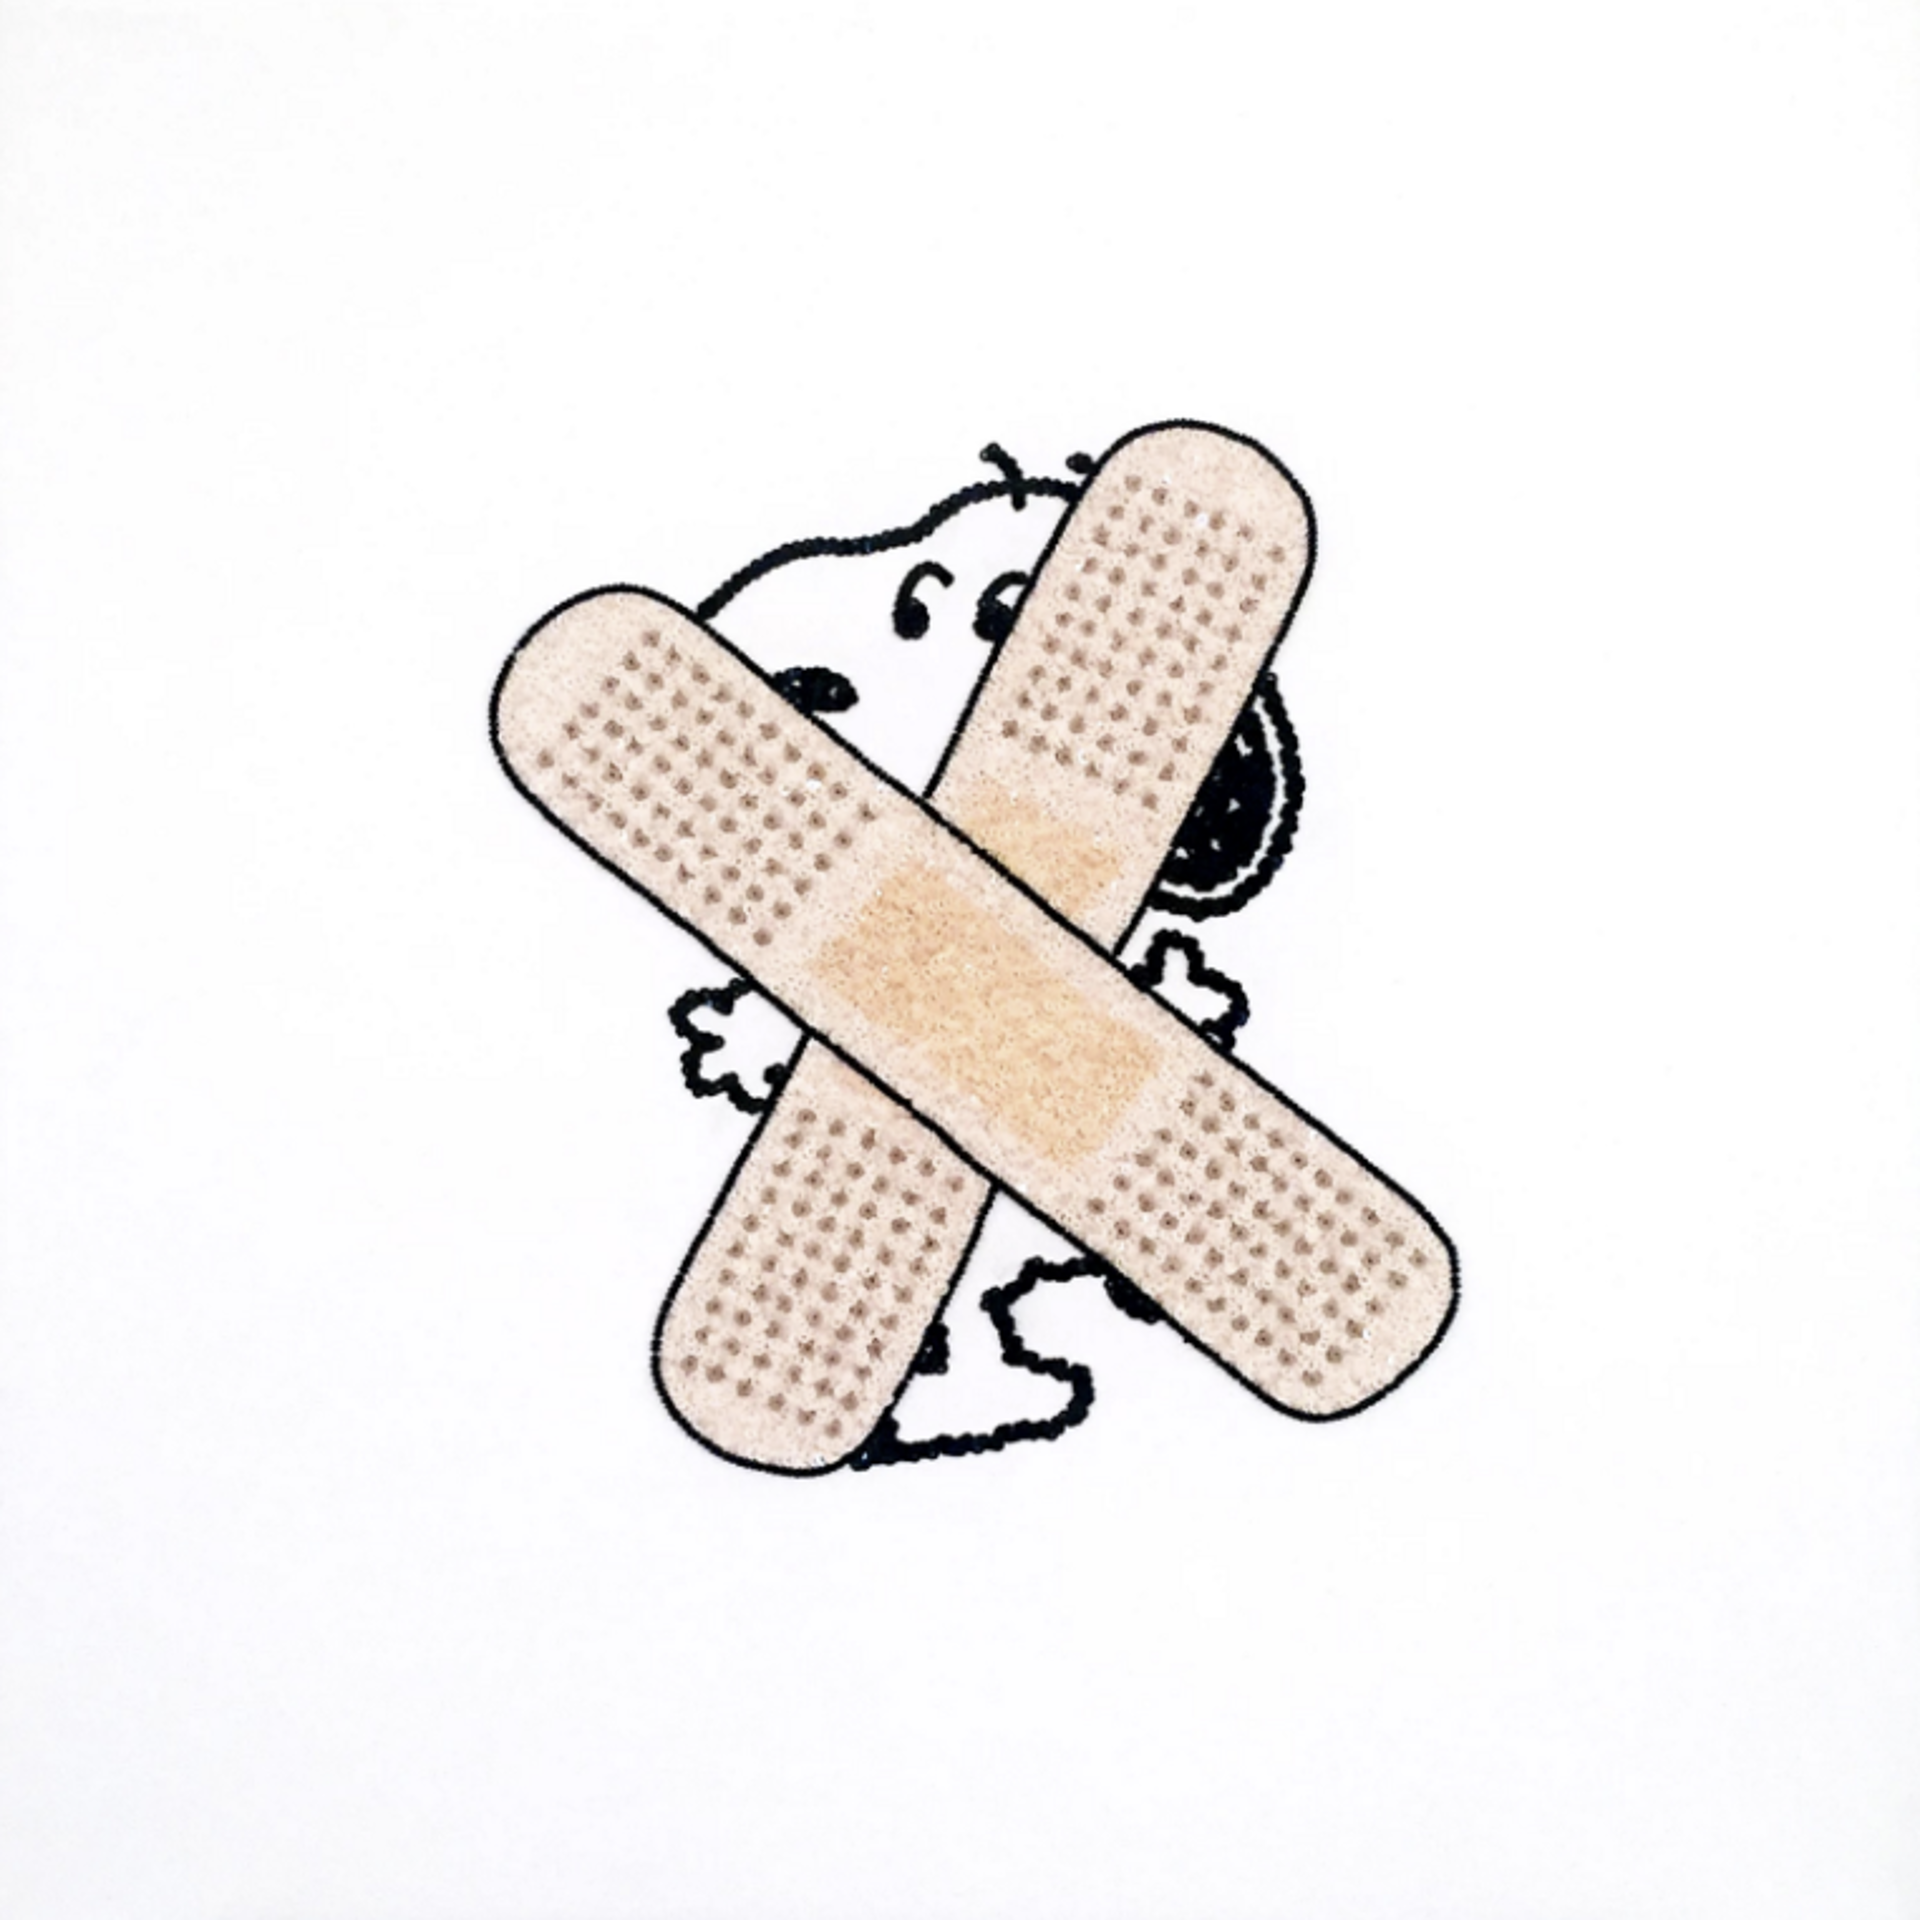 Snoopy plaster by Philip Colbert